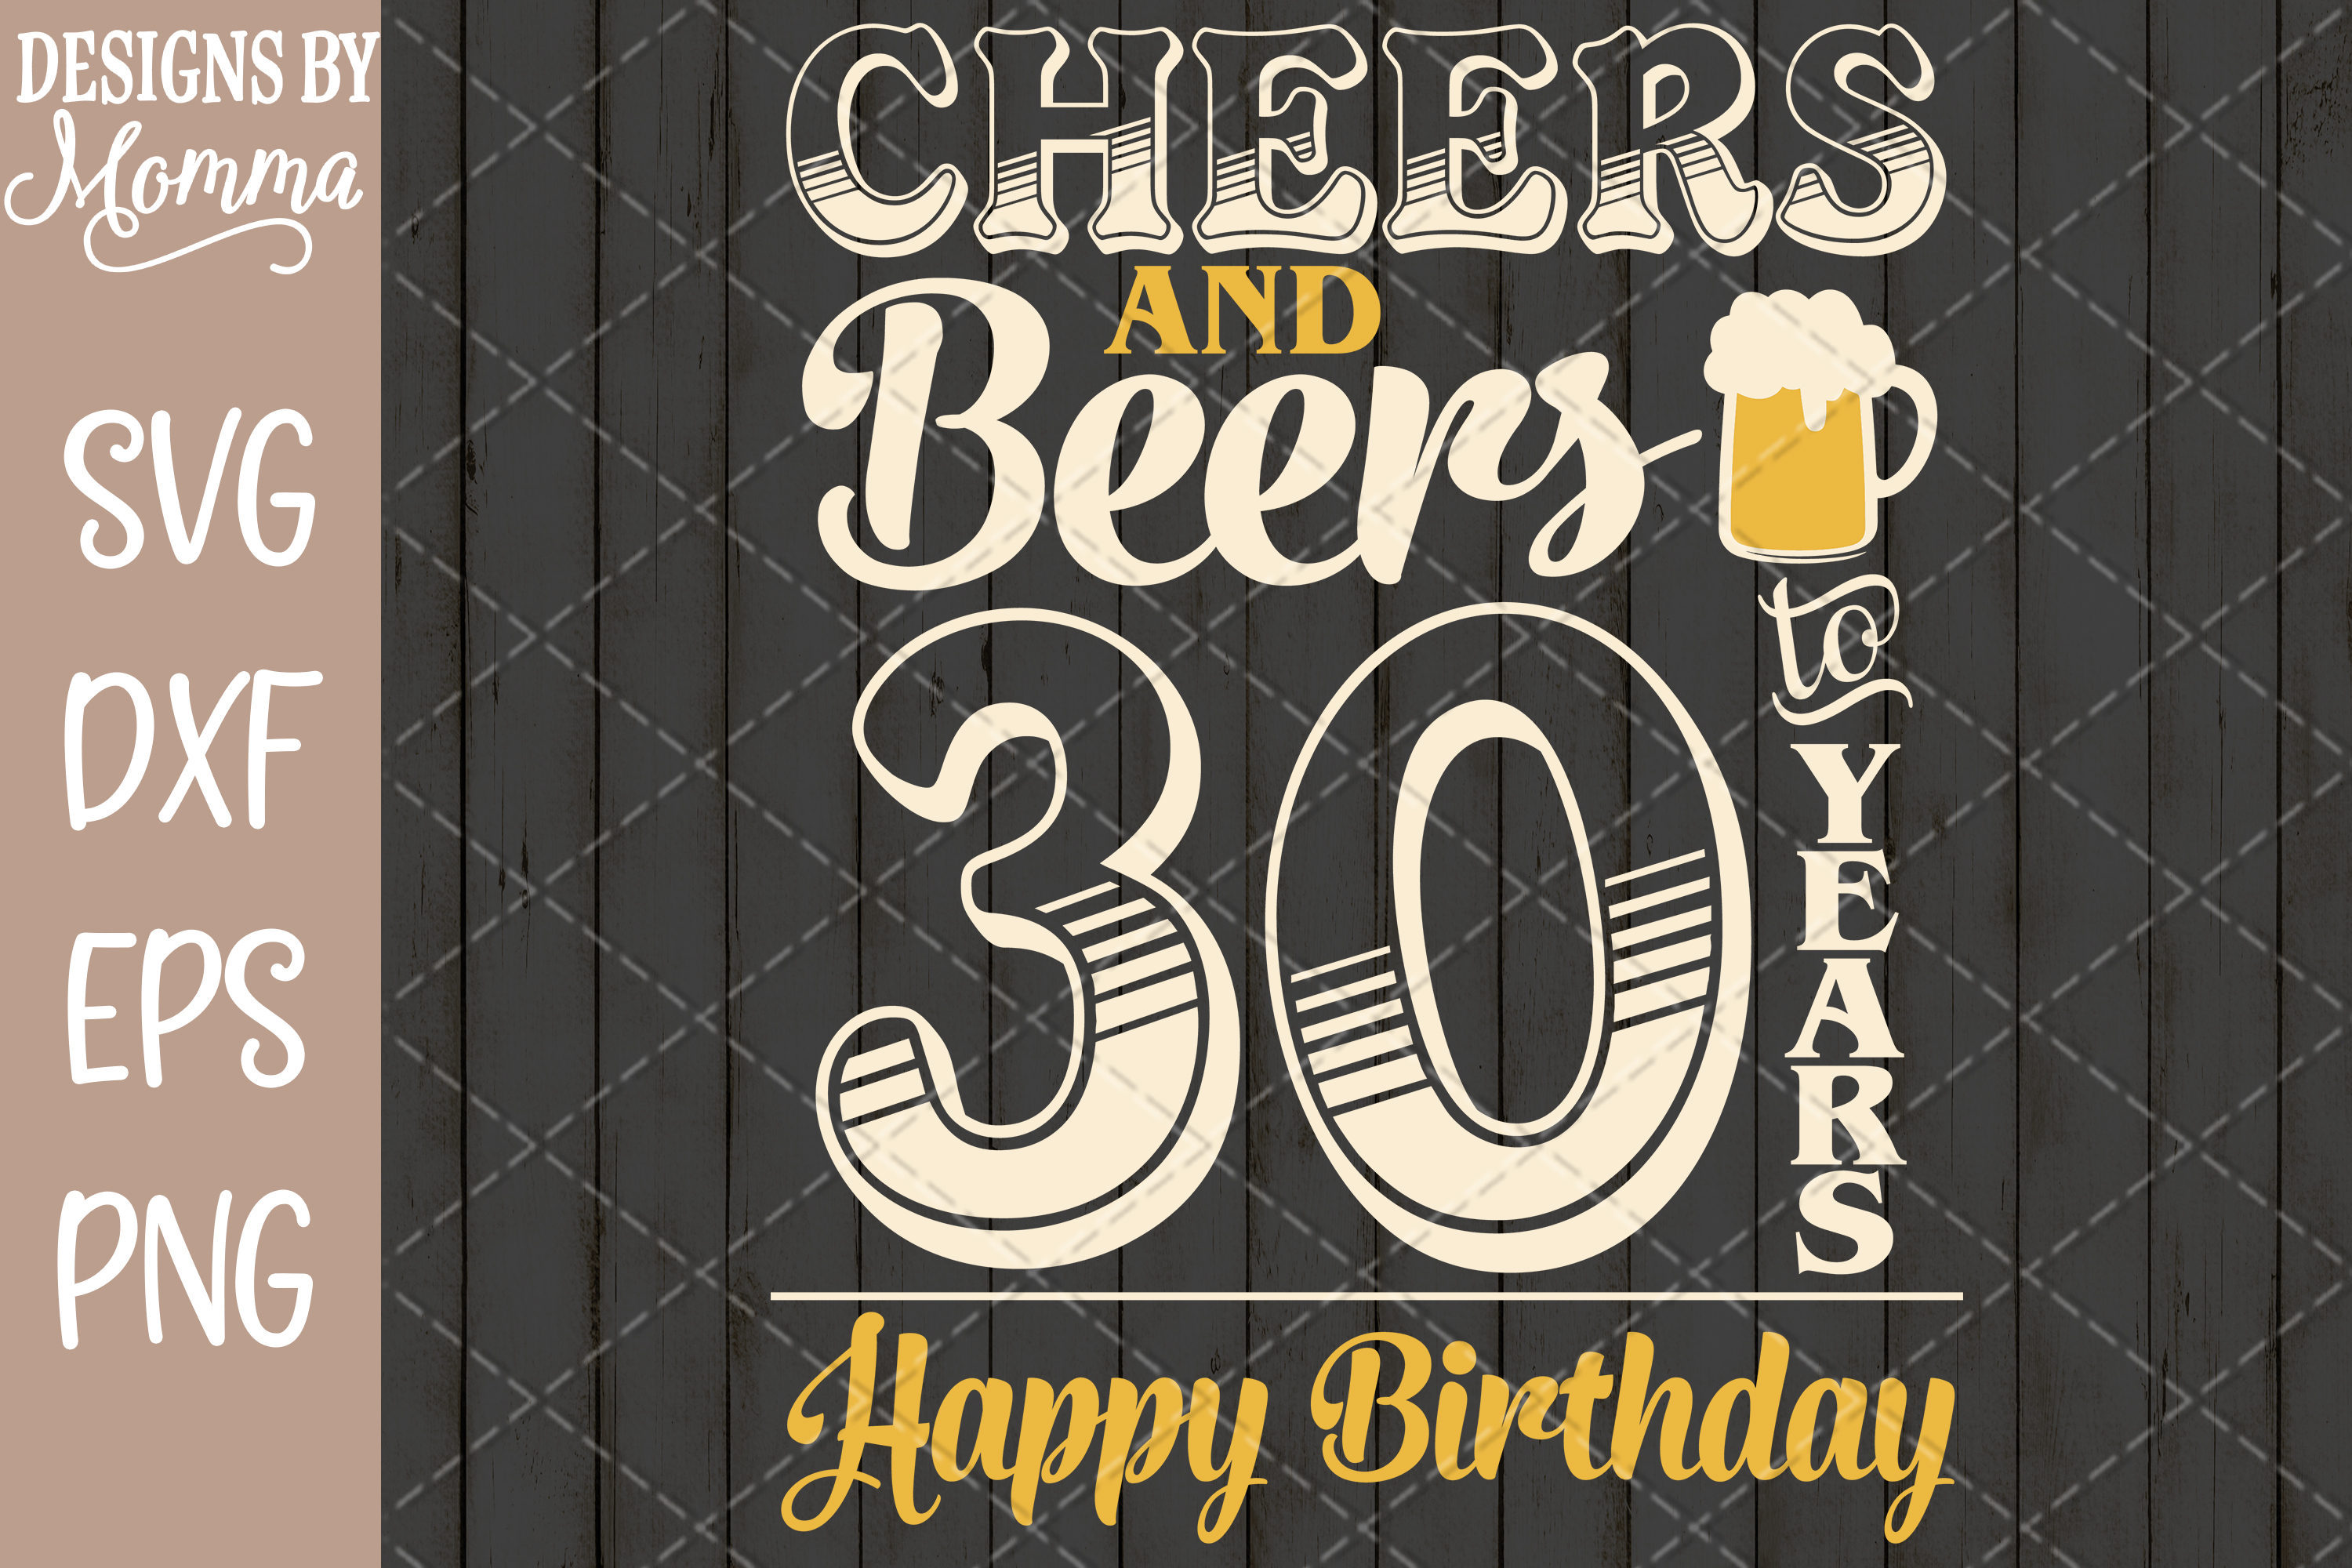 cheers-and-beers-to-30-years-birthday-svg